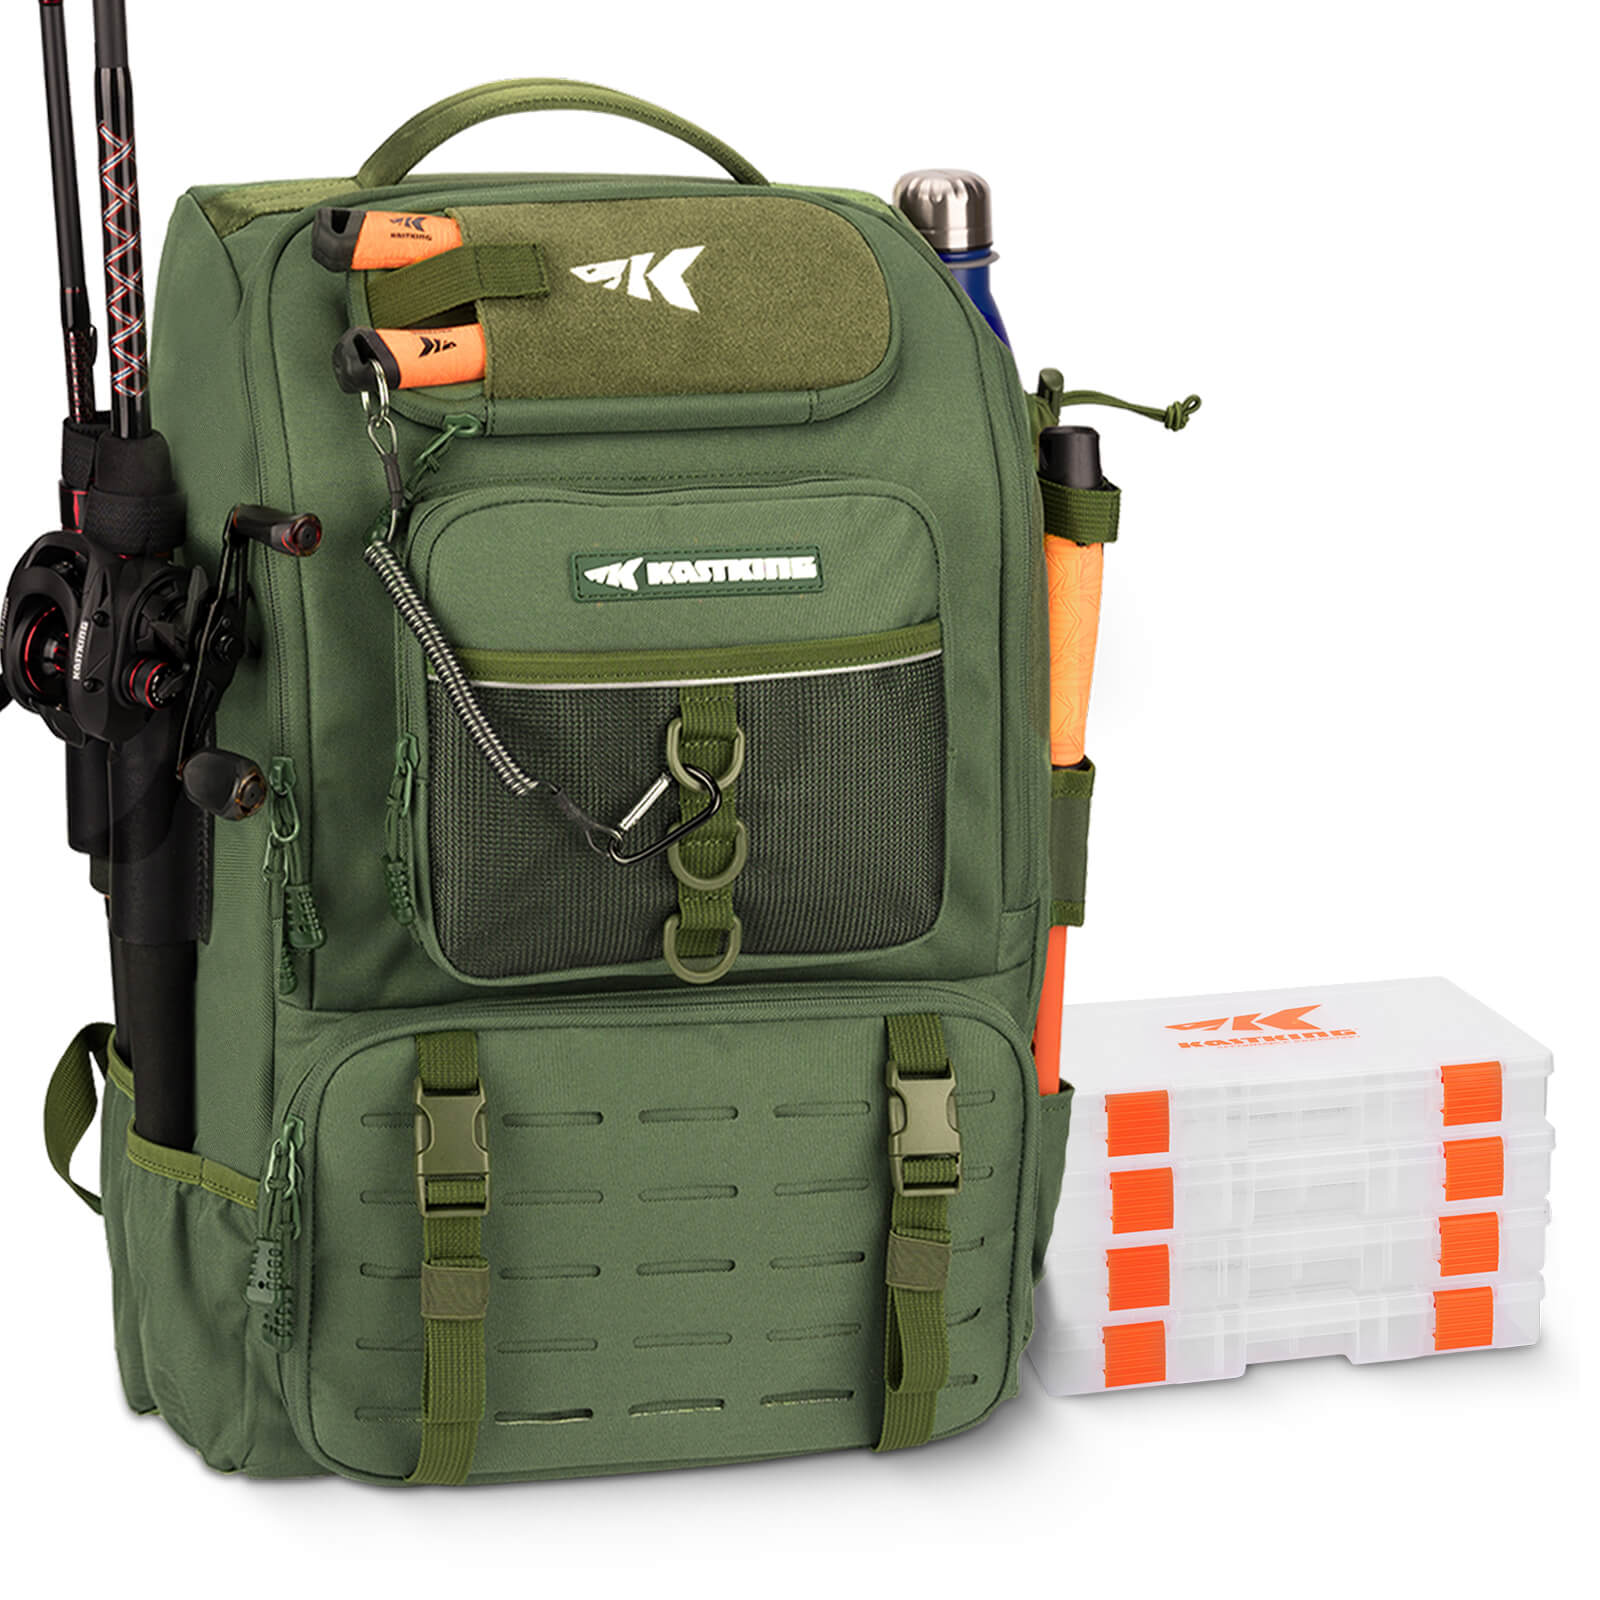 Backpack Tackle Box: Smart Tackle Storage for the Traveling